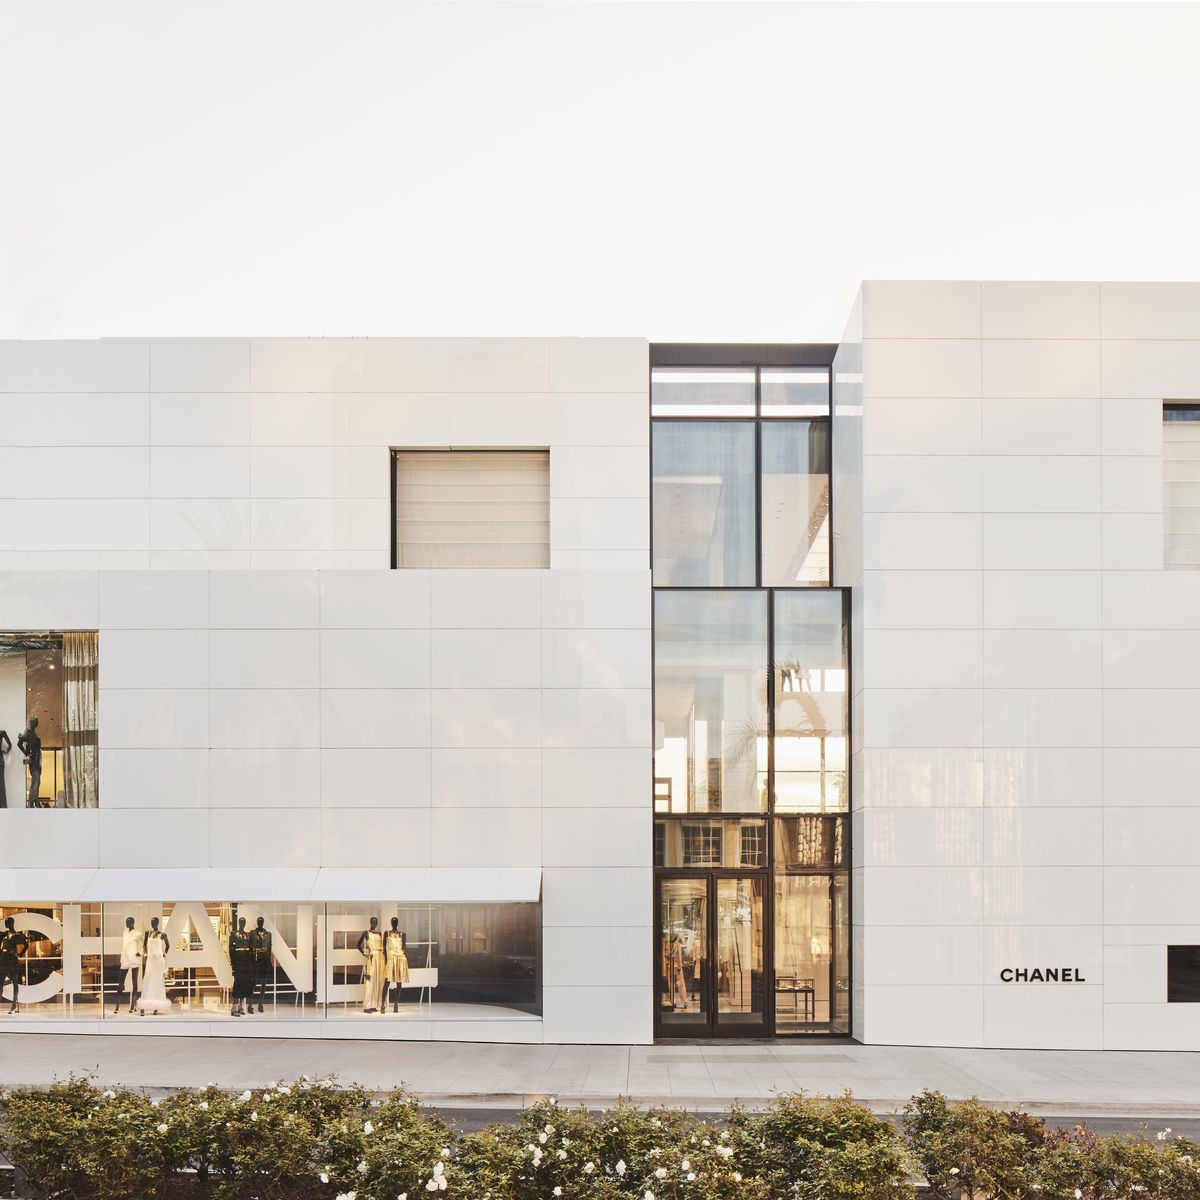 Fødested Eastern Spectacle Chanel Just Opened Its Biggest U.S. Store in Beverly Hills